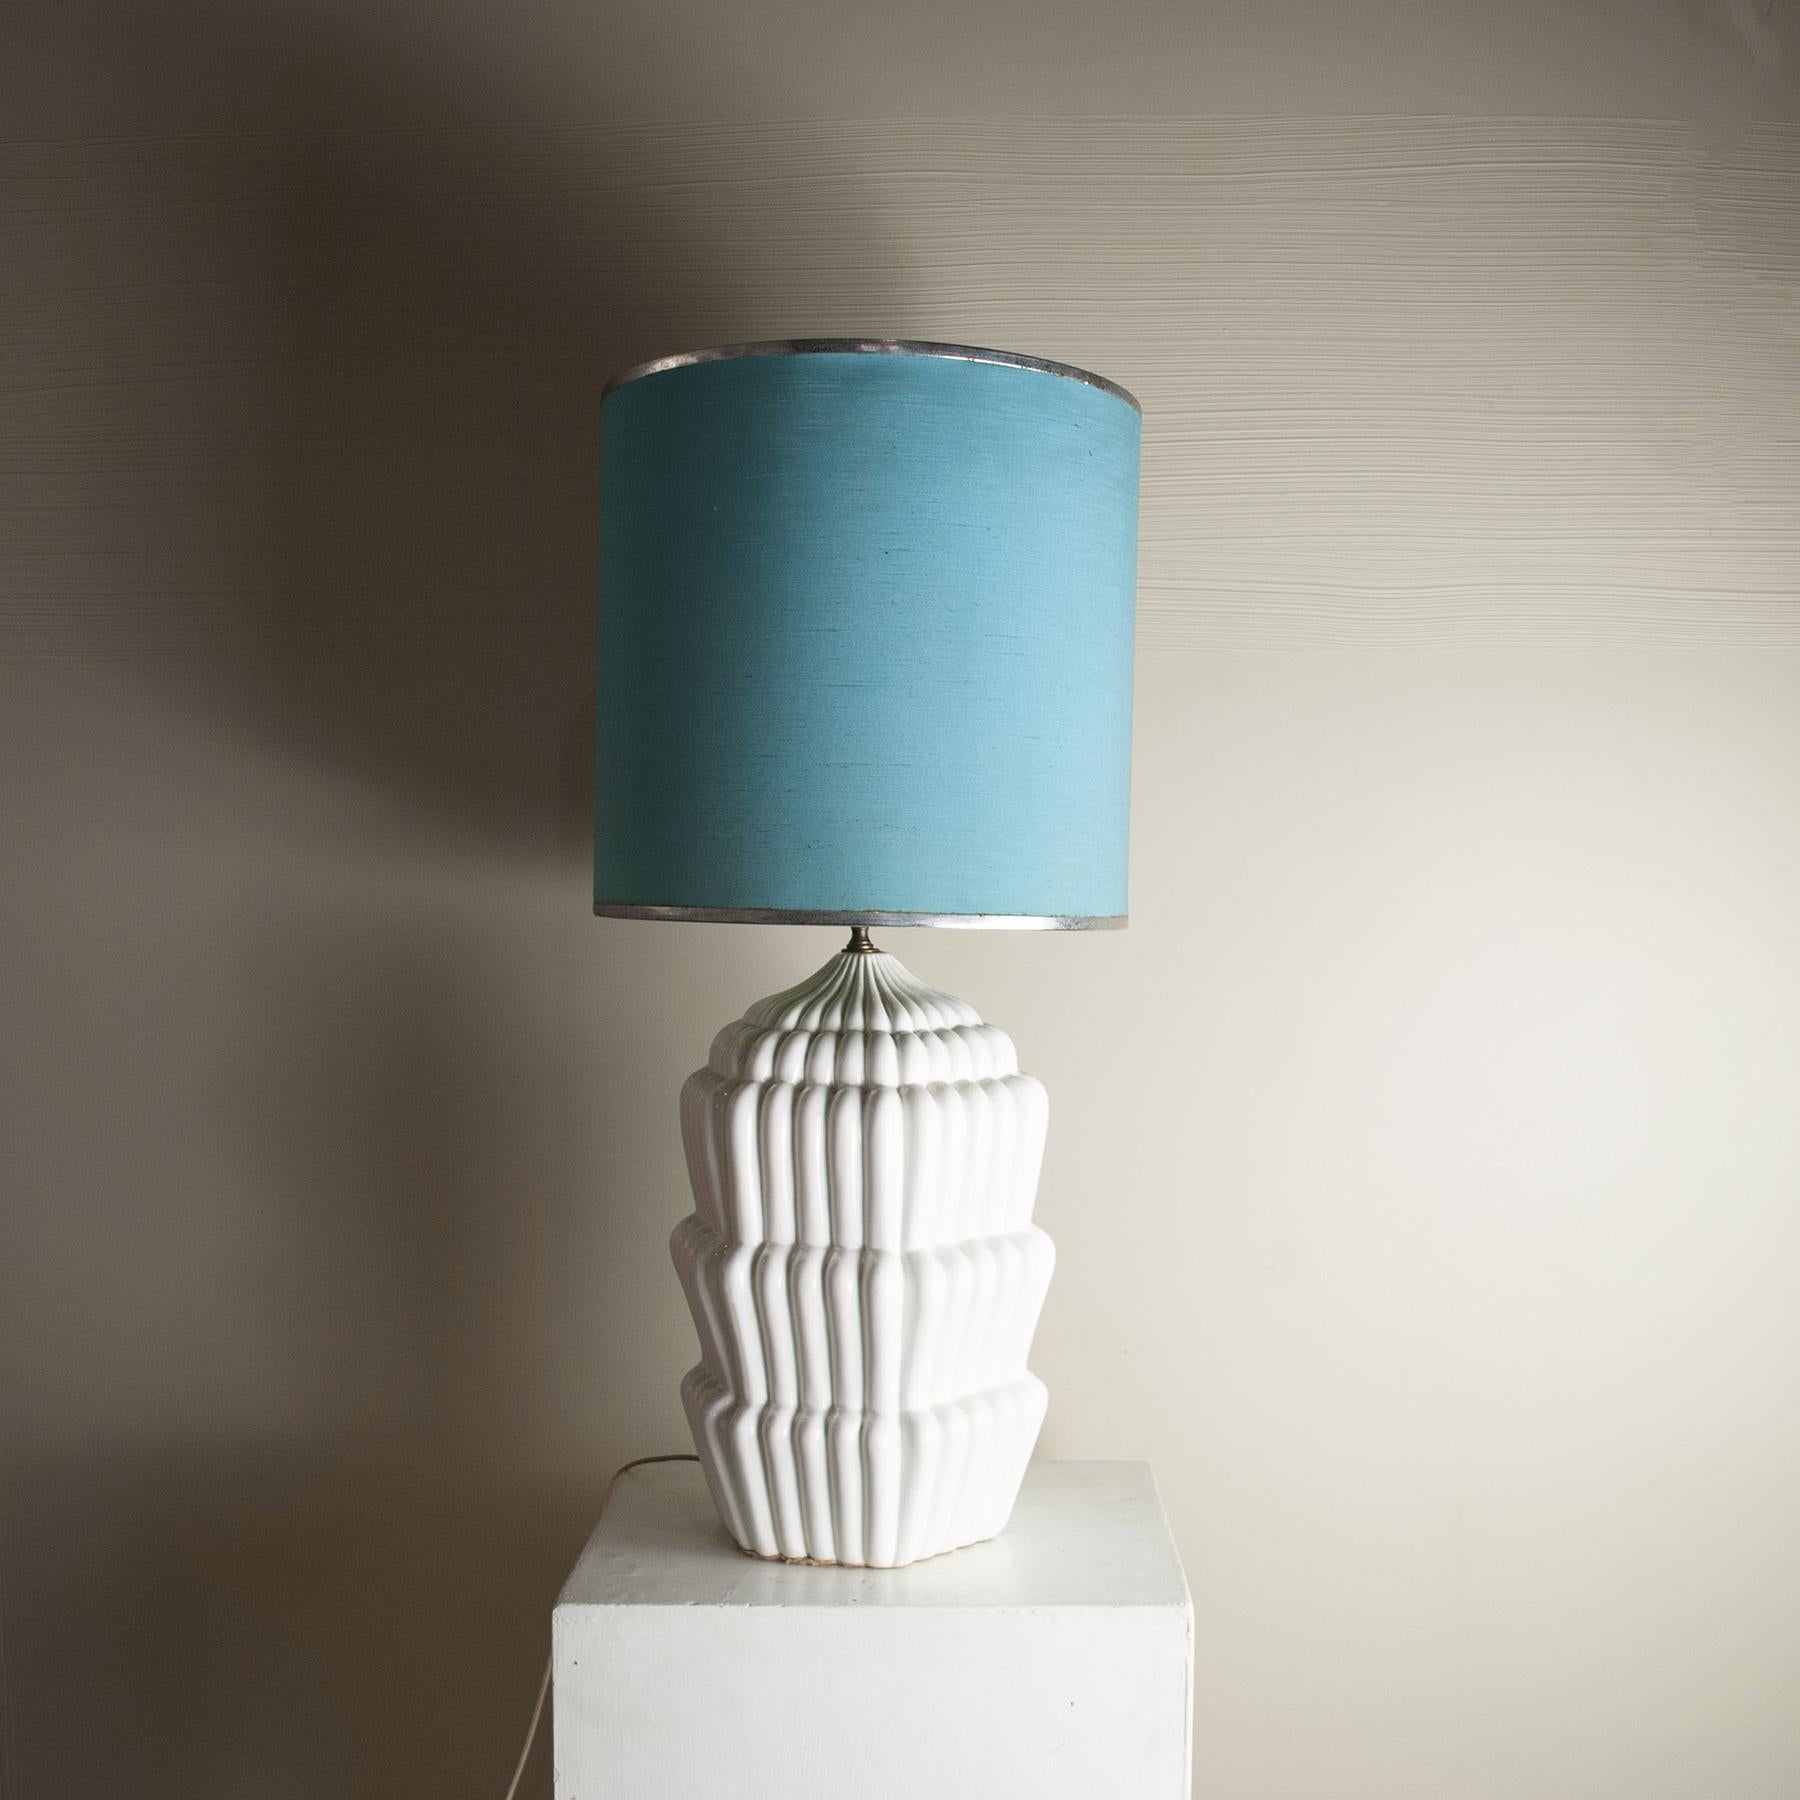 Italian 1960s table lamp made of glazed ceramic and brass, depicting a cake design Tommaso Barbi
The lamp is sold without the lampshade in the photo, but it can be requested in the shape sizes and colors as desired with an extra charge.

n.b.